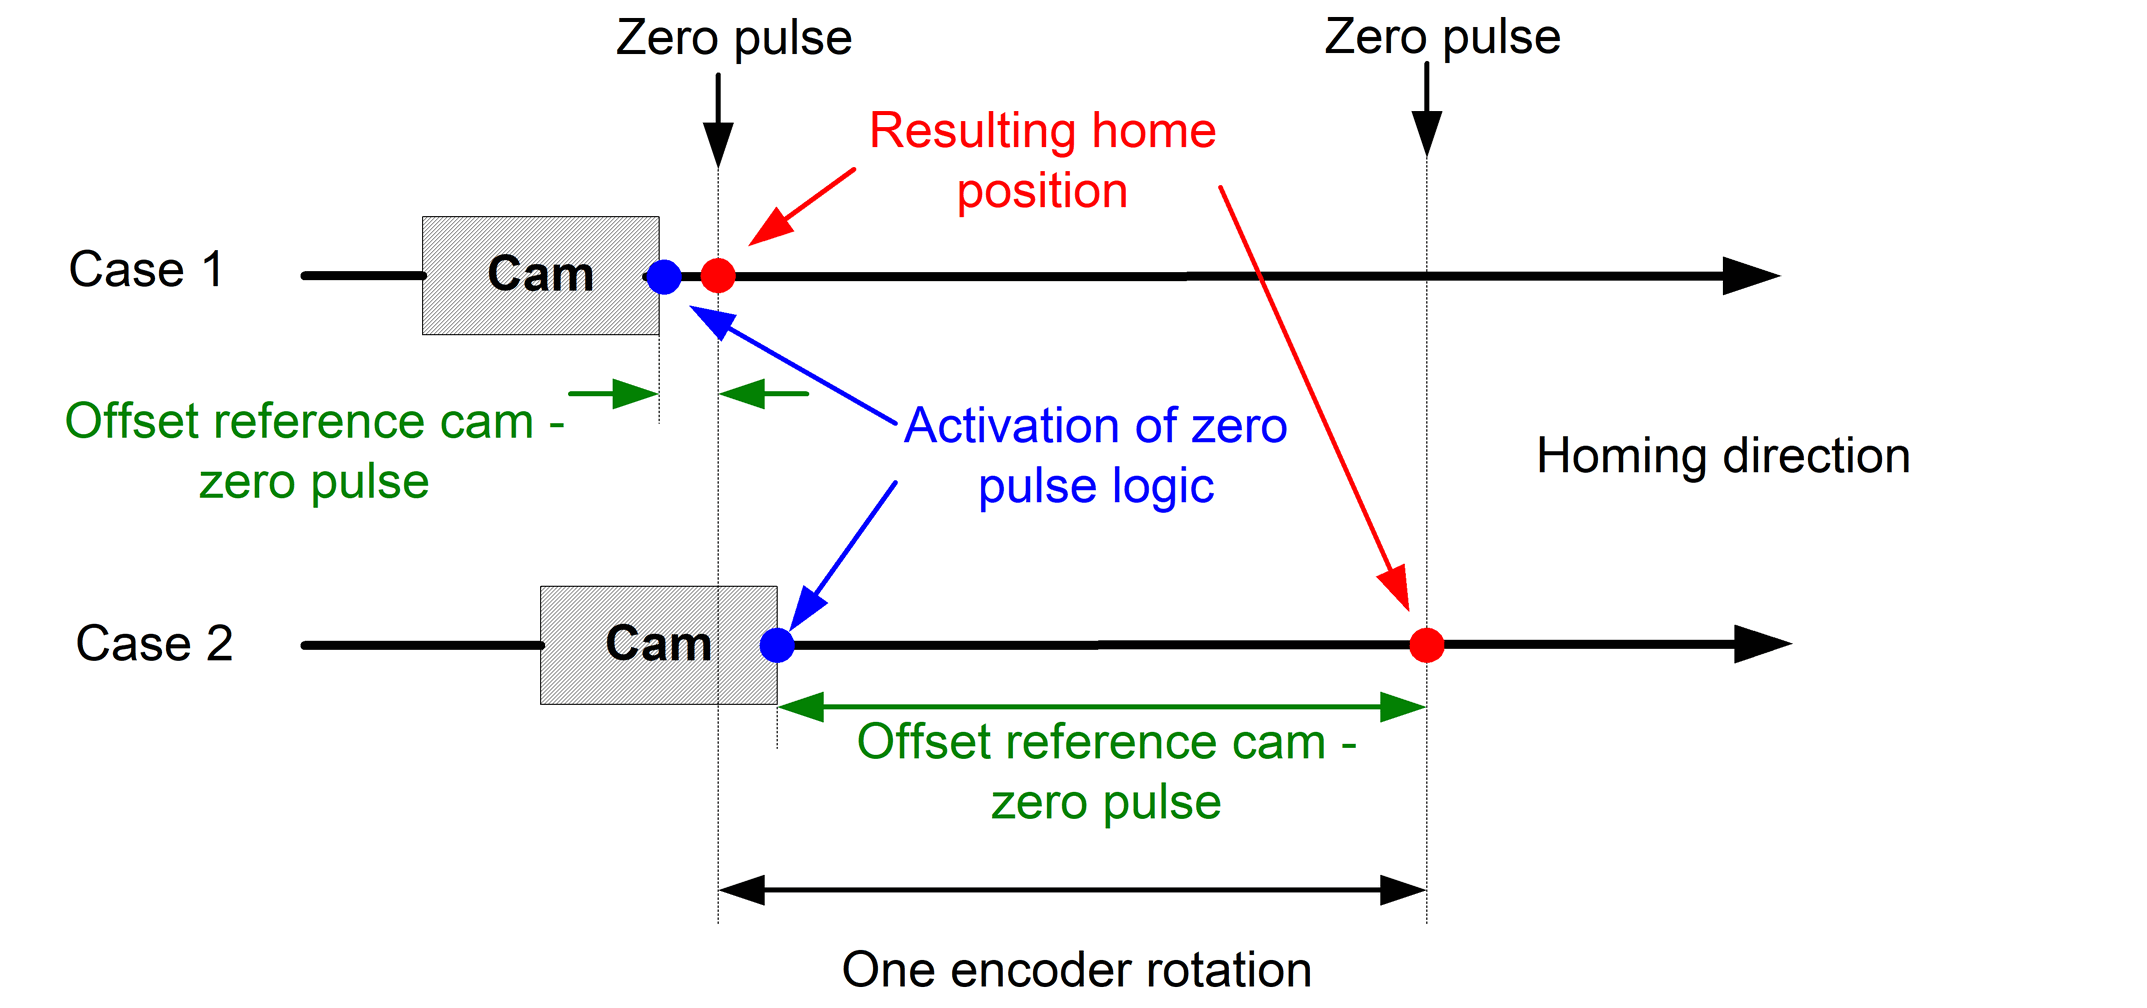 The zero pulse may not be reliably detected